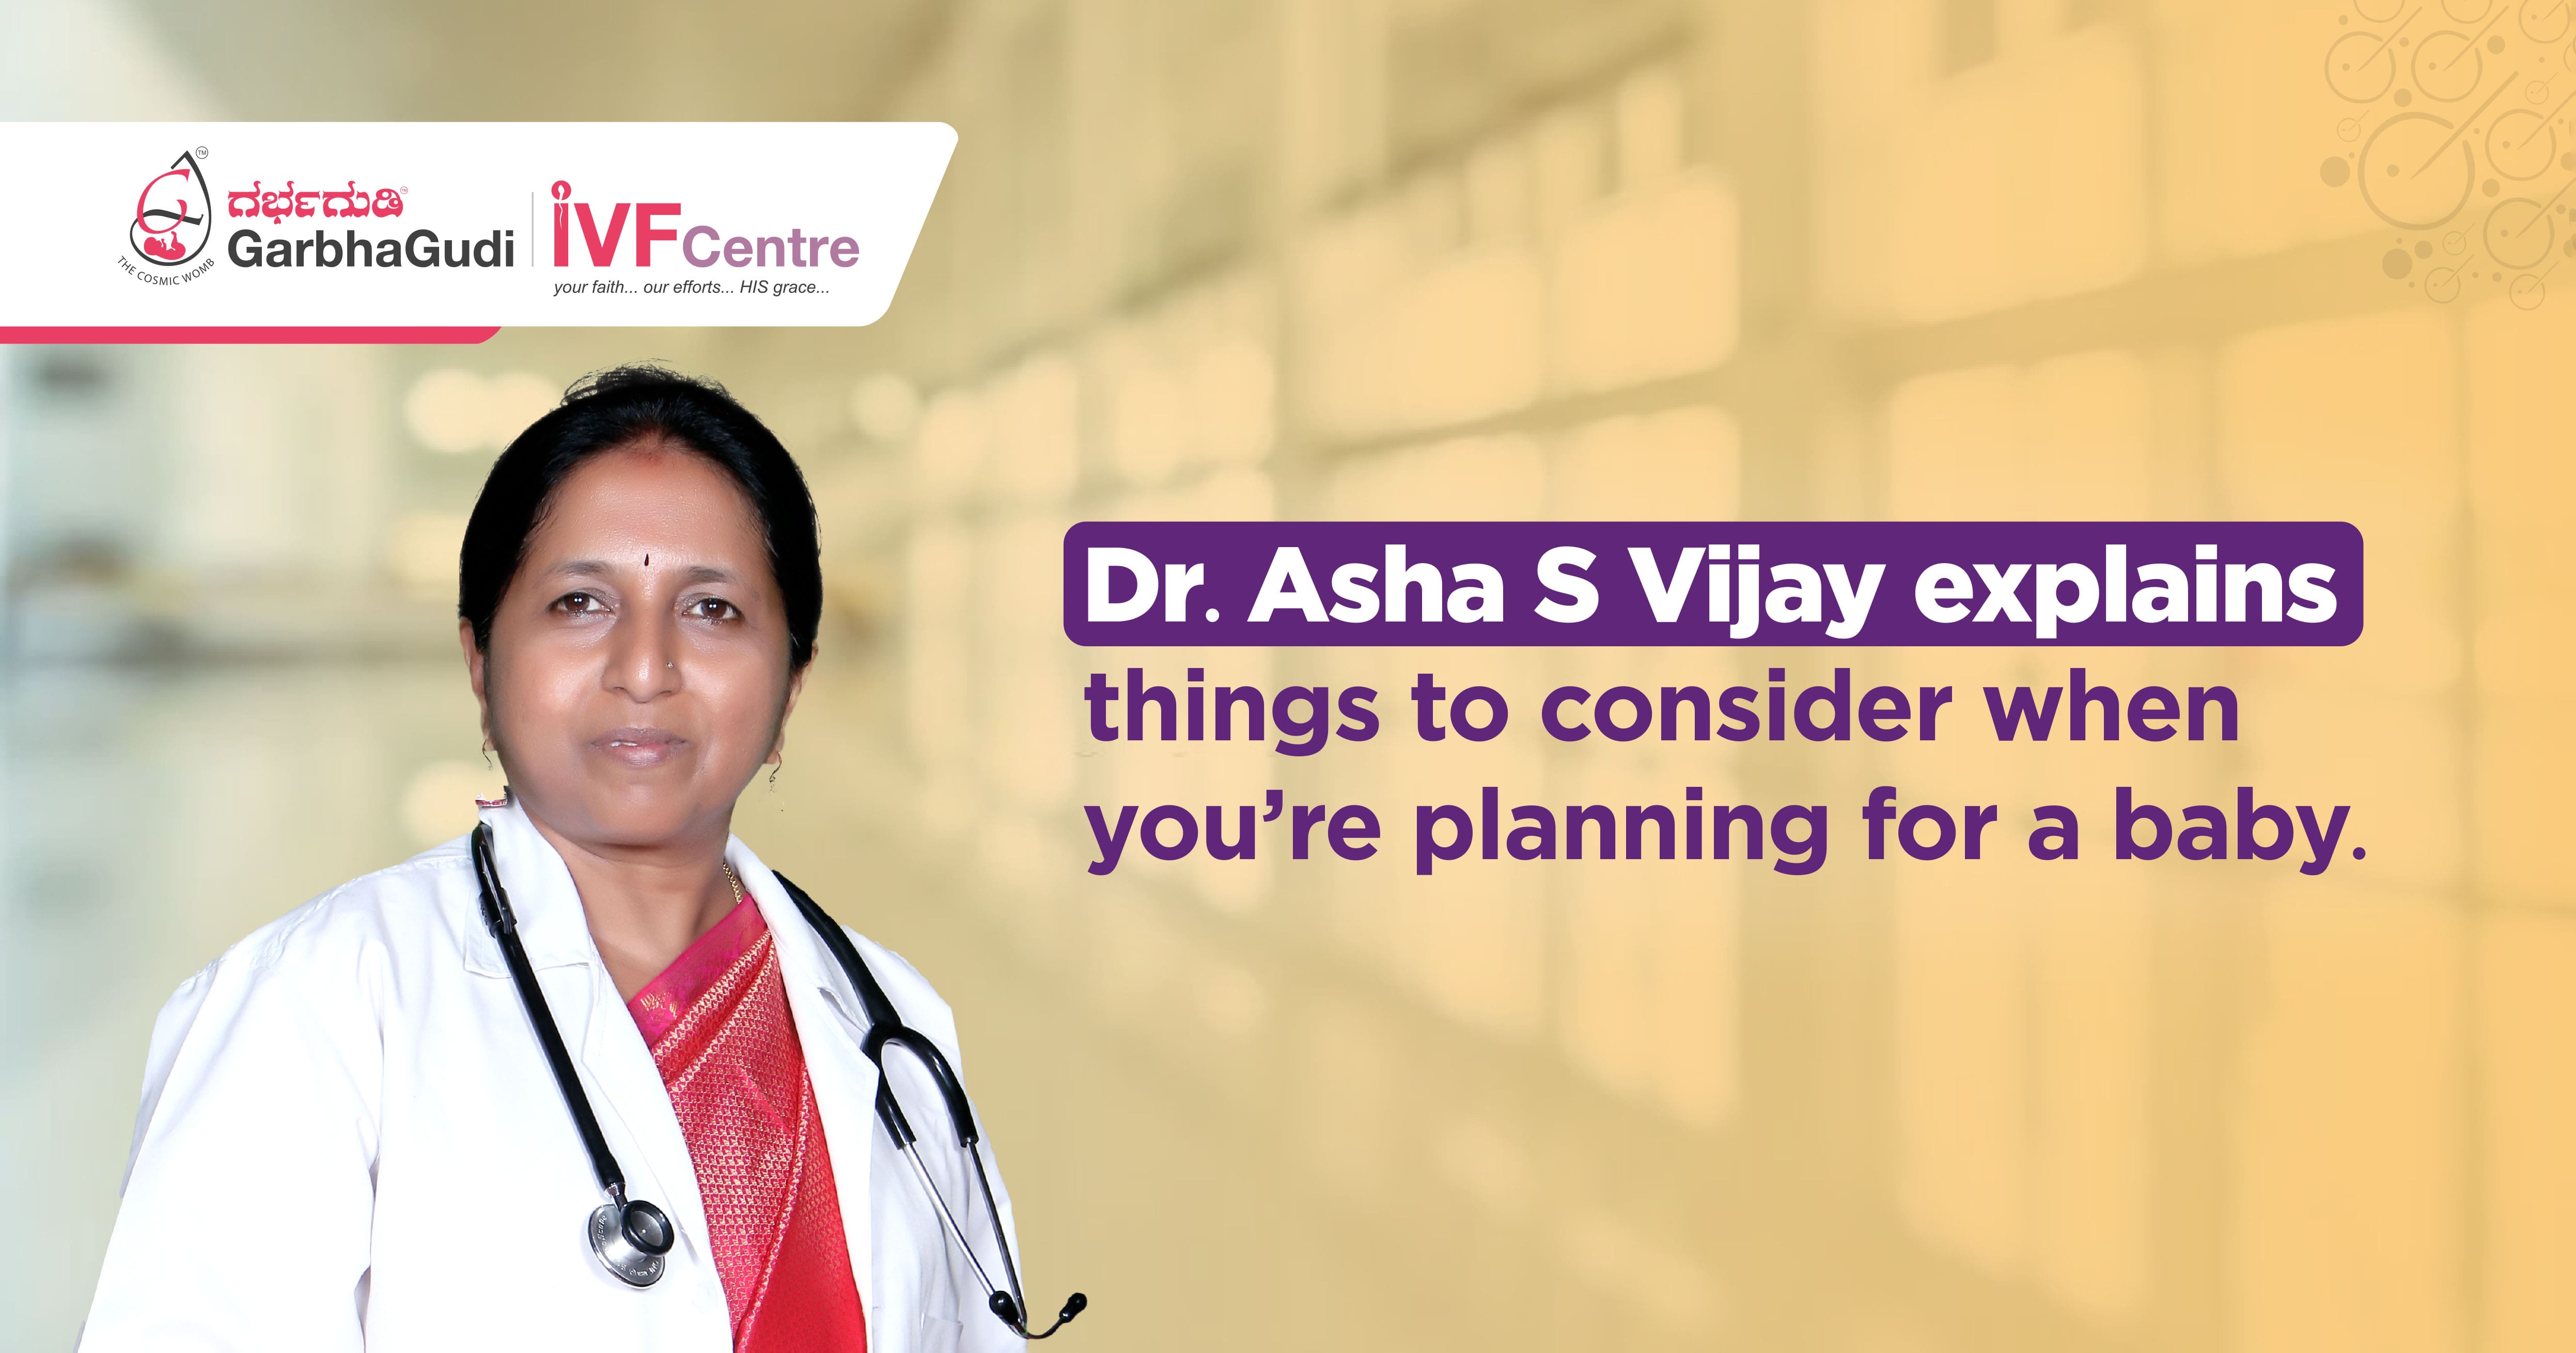 Dr Asha S Vijay Explains Things to Consider When You're Planning for a Baby